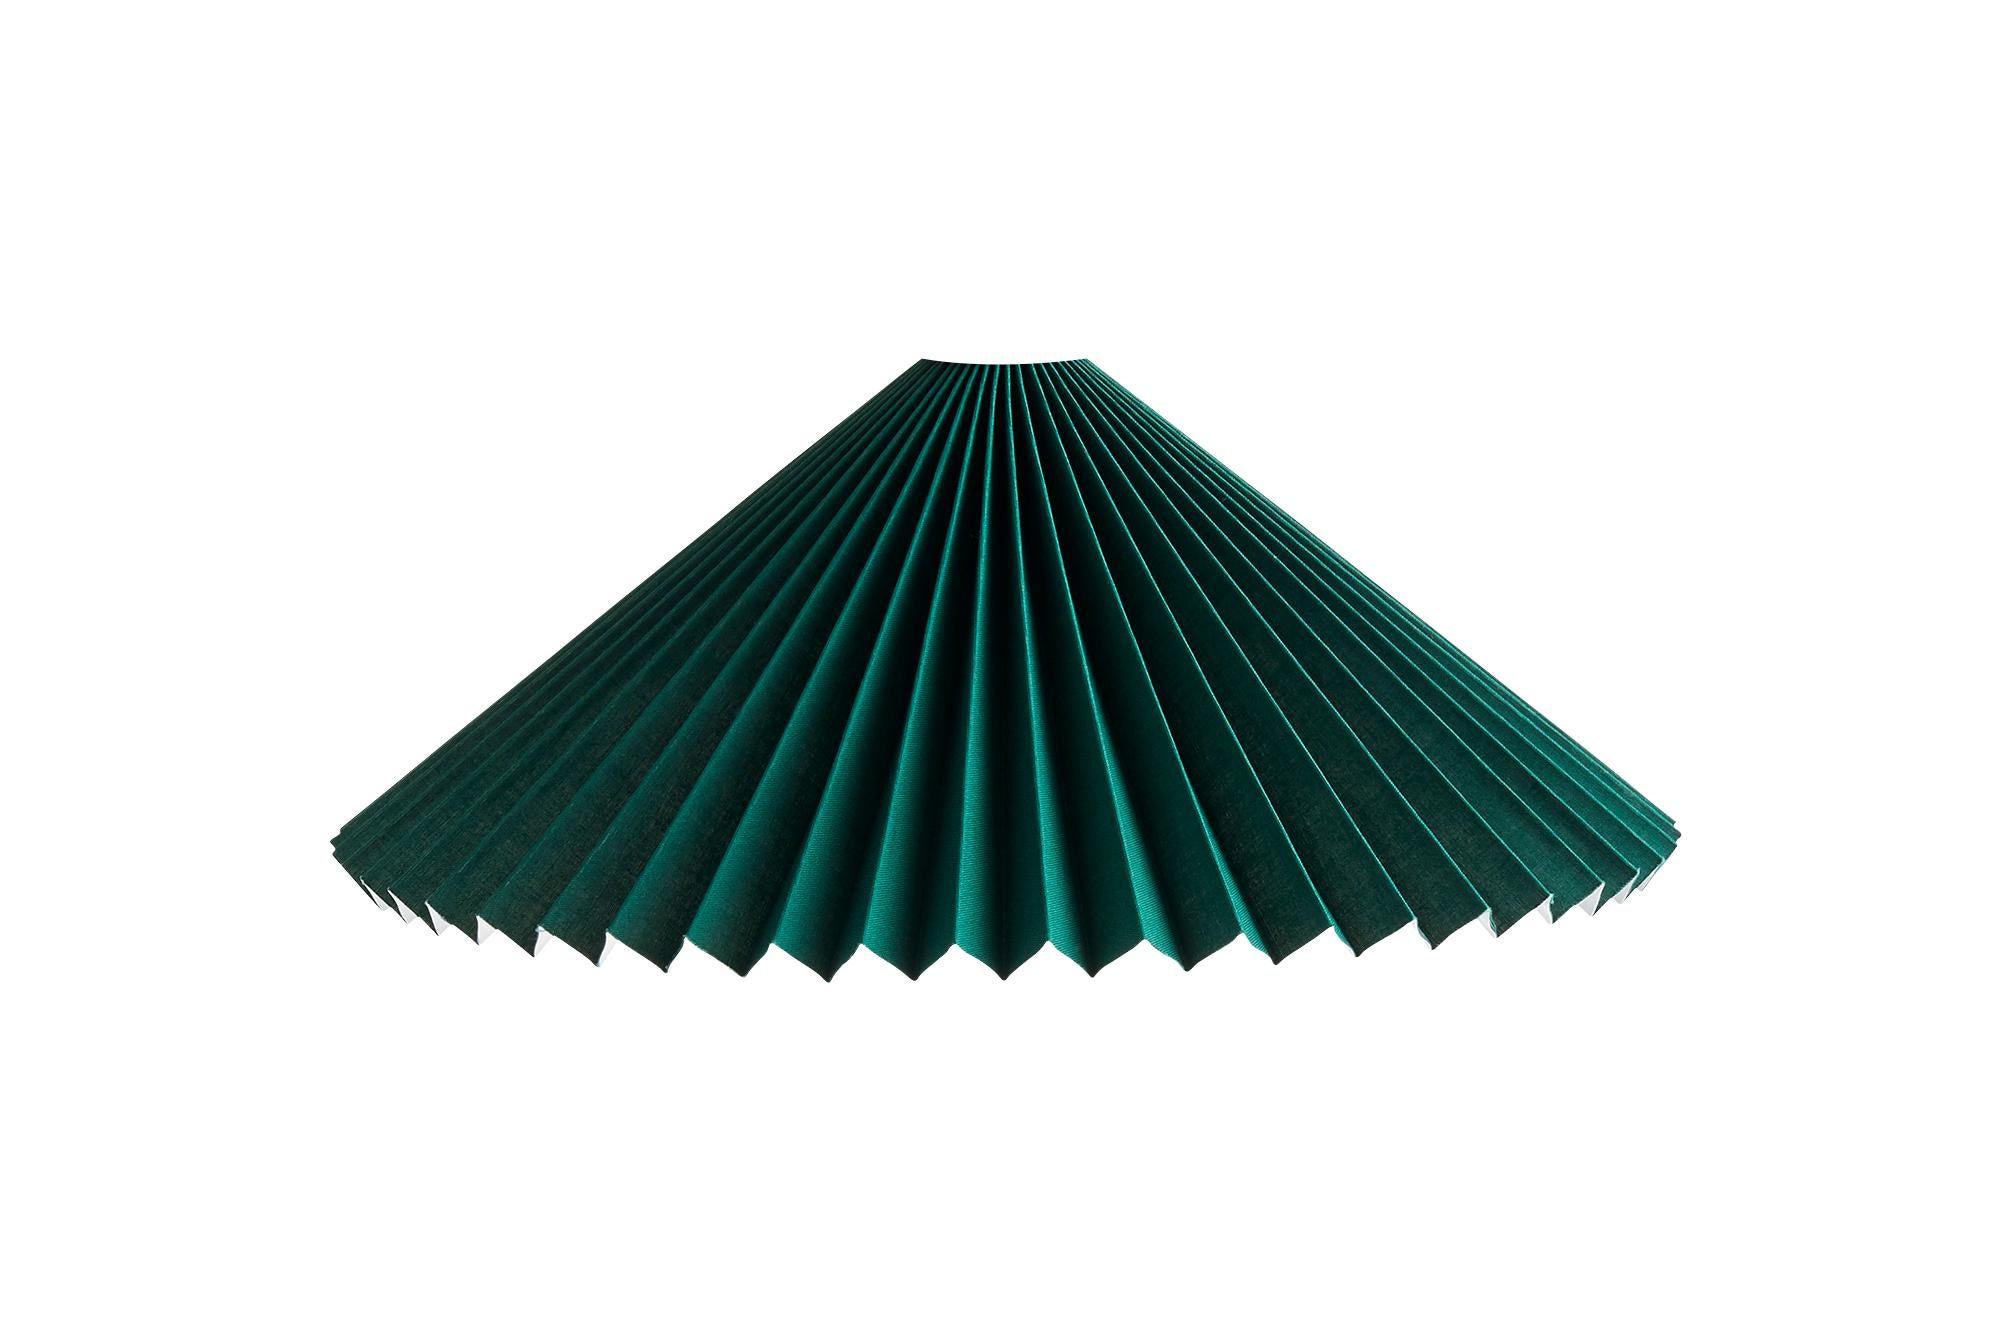 Scandinavian Modern Matin Table Lamp, 38 cm - Green by Inga Sempé for Hay For Sale